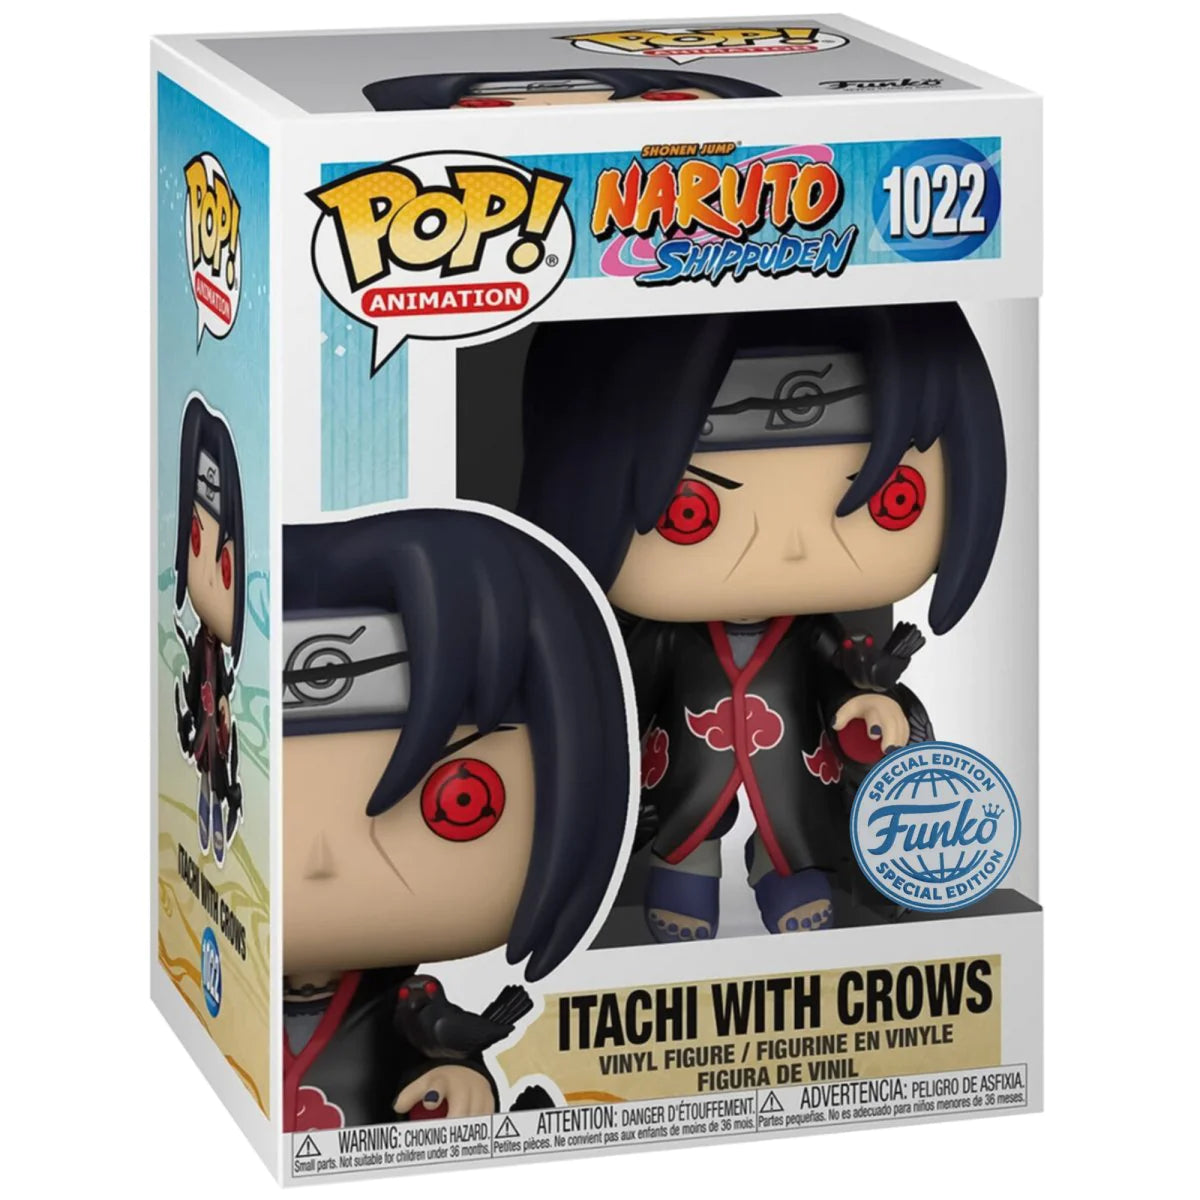 Naruto - Itachi with Crows (1022) "special Ed."